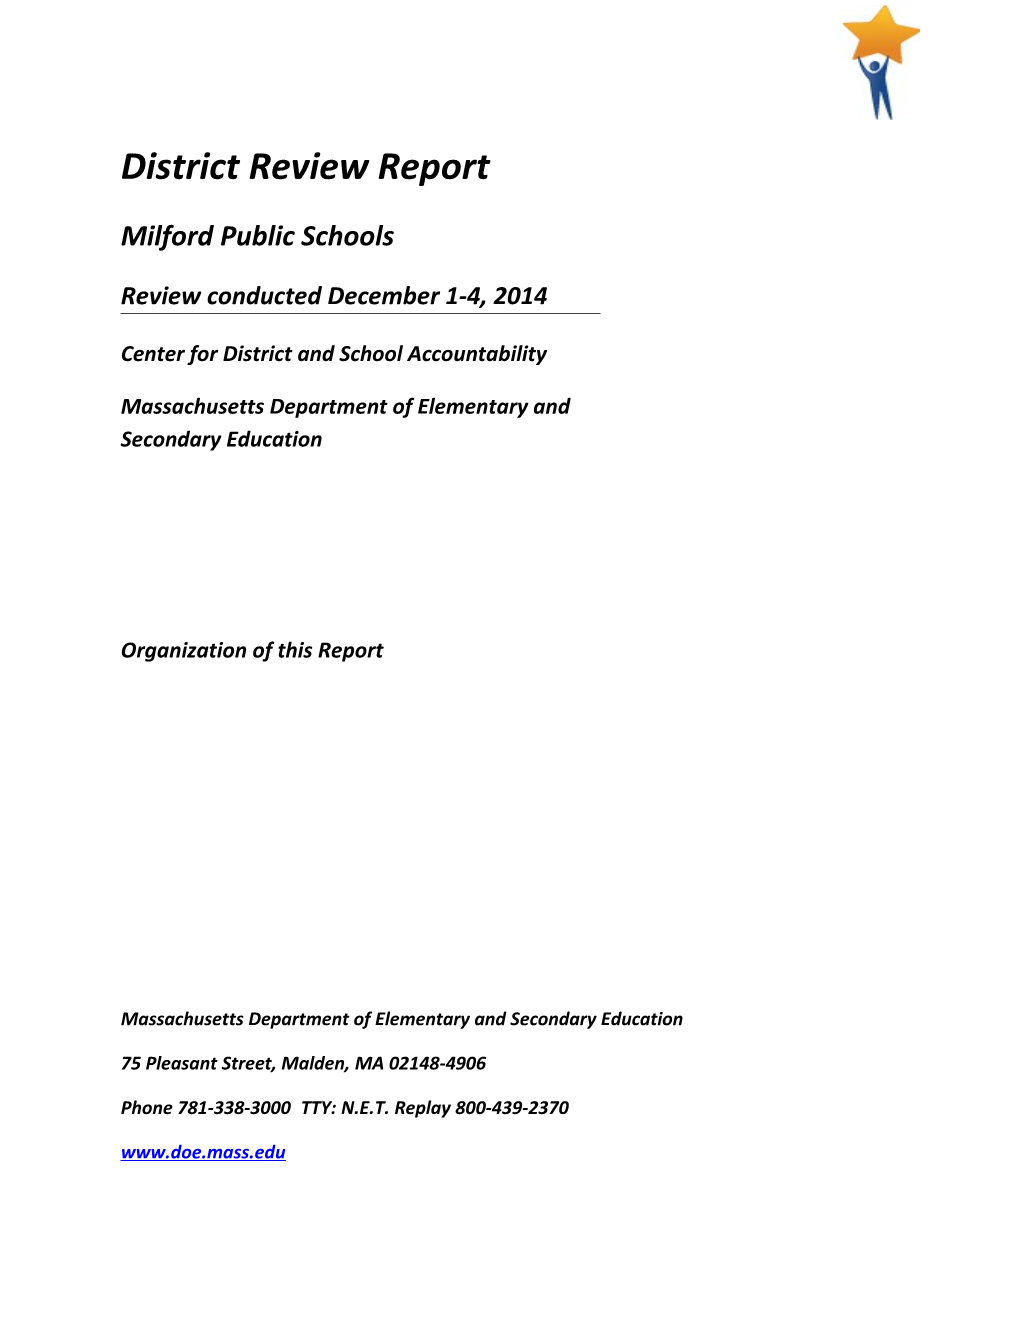 2014 - Milford District Review Report